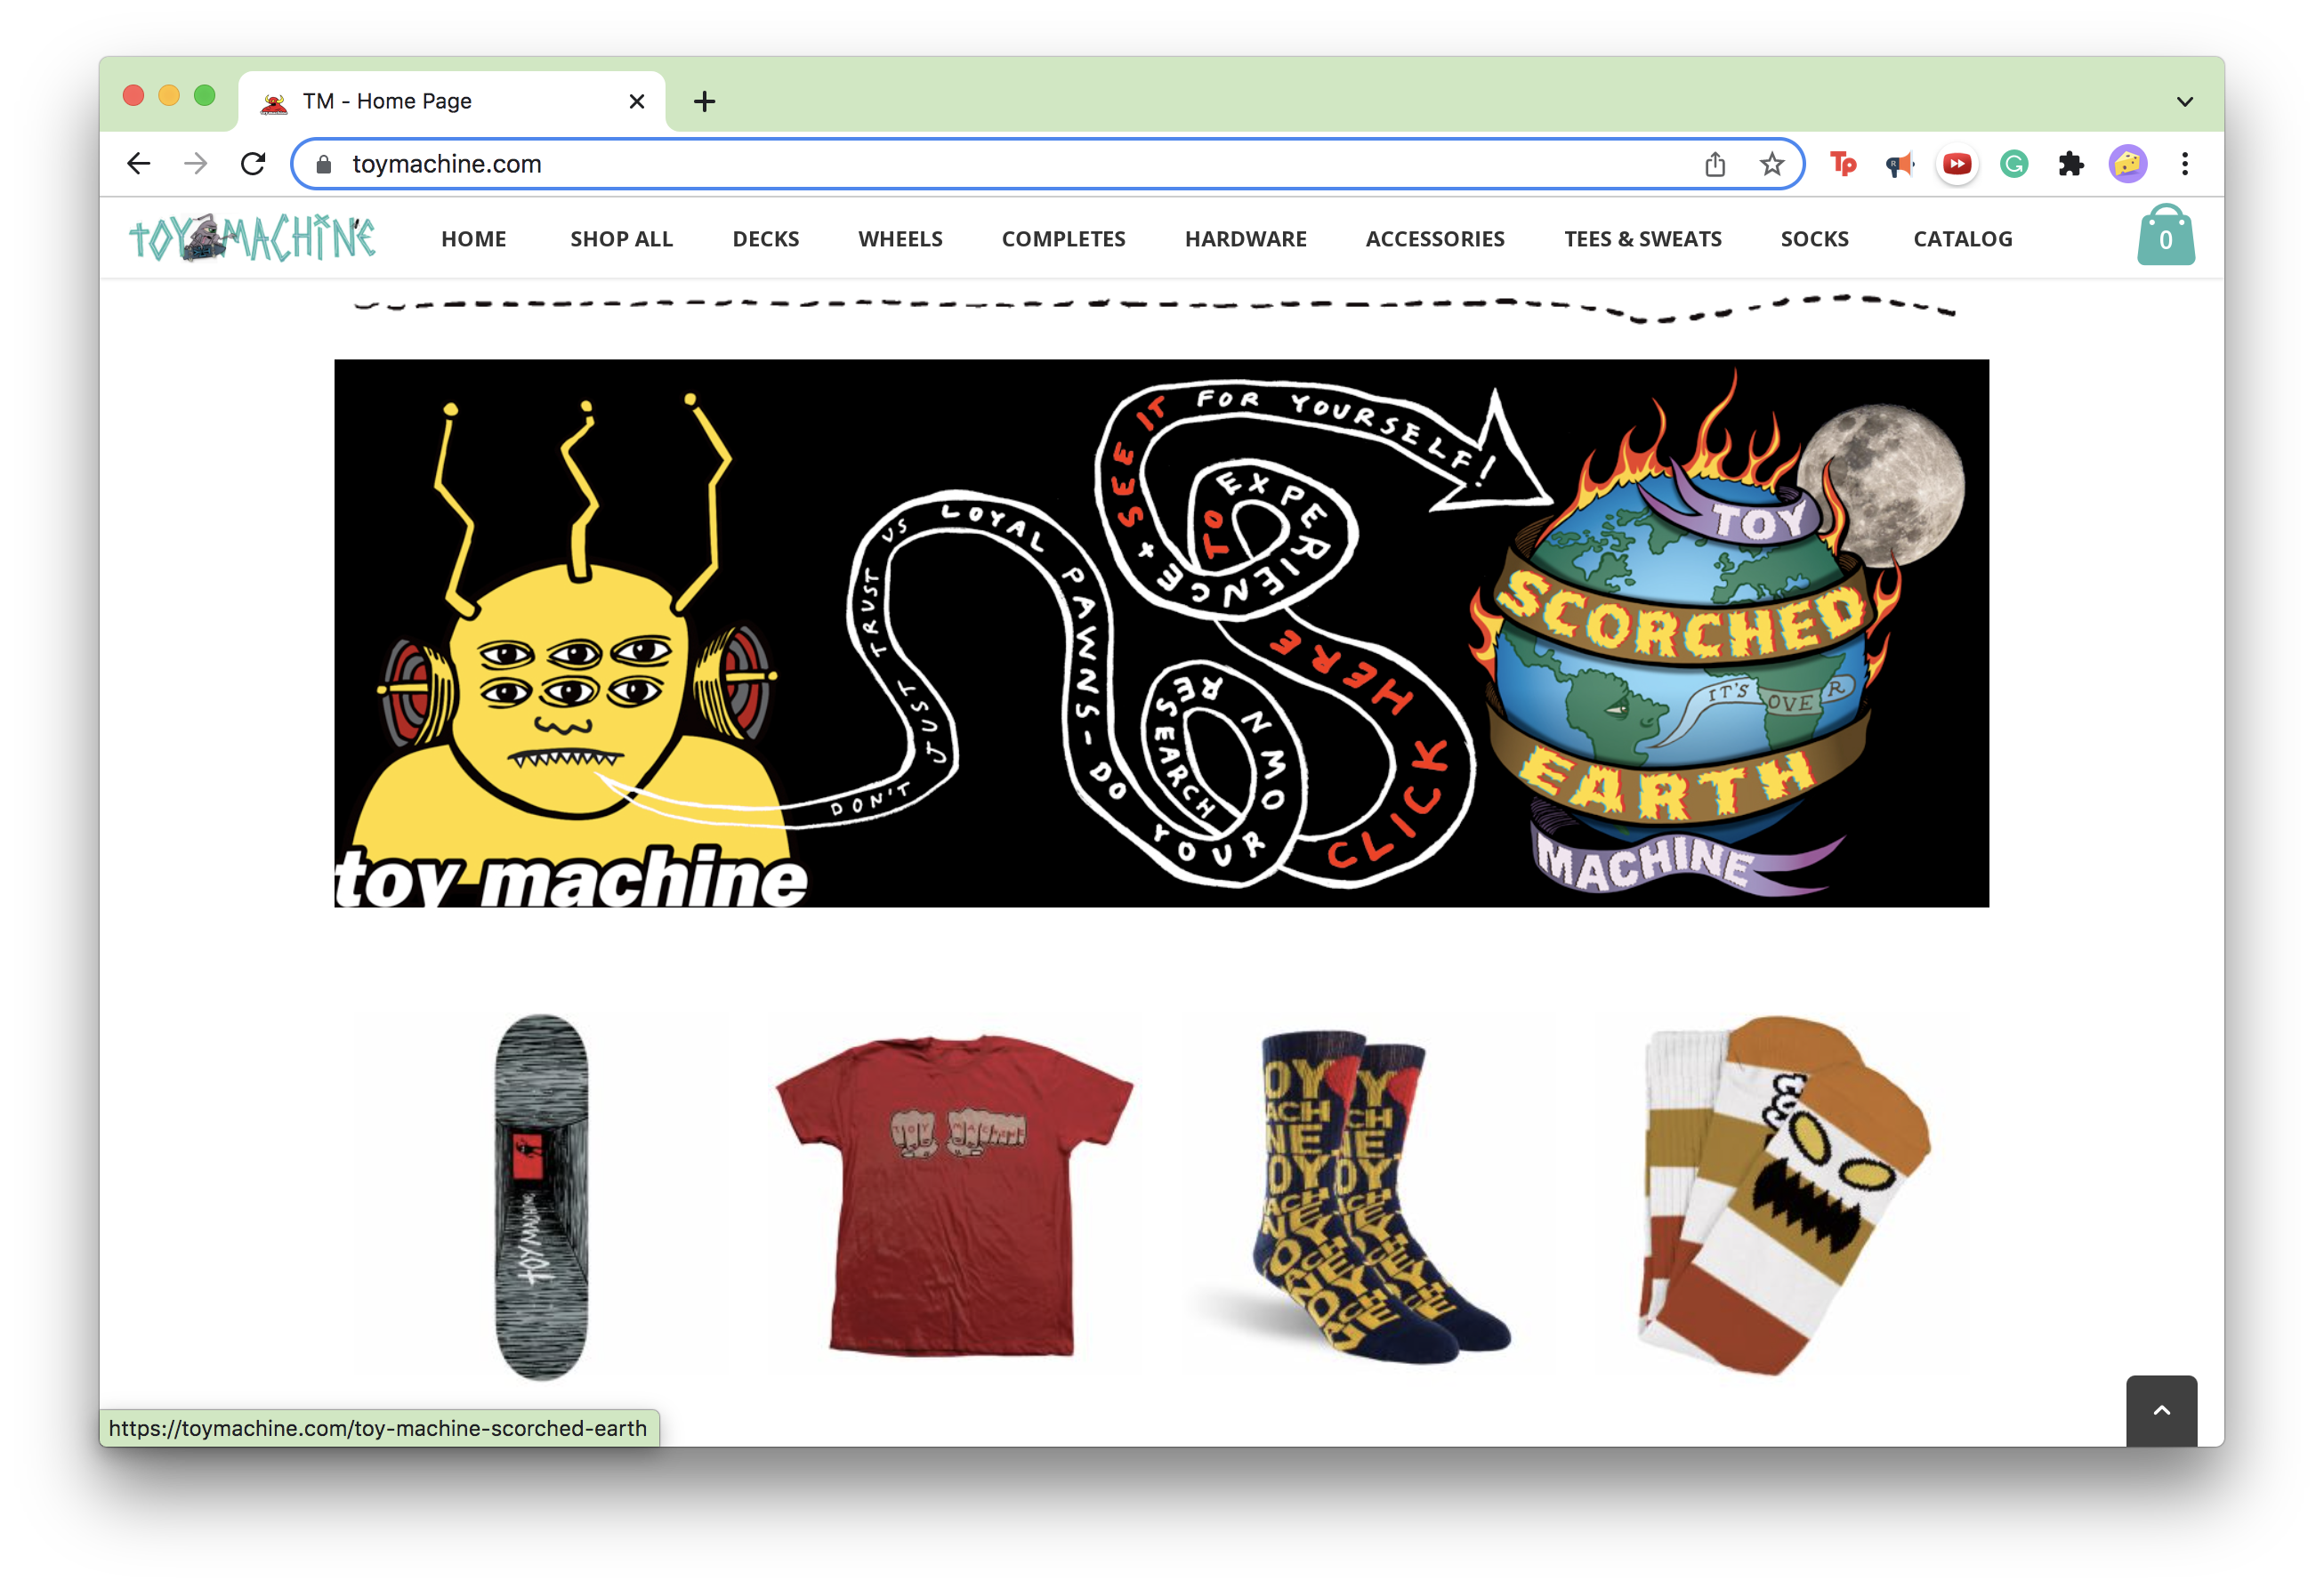 Screenshot of the home page of the Toy Machine website.